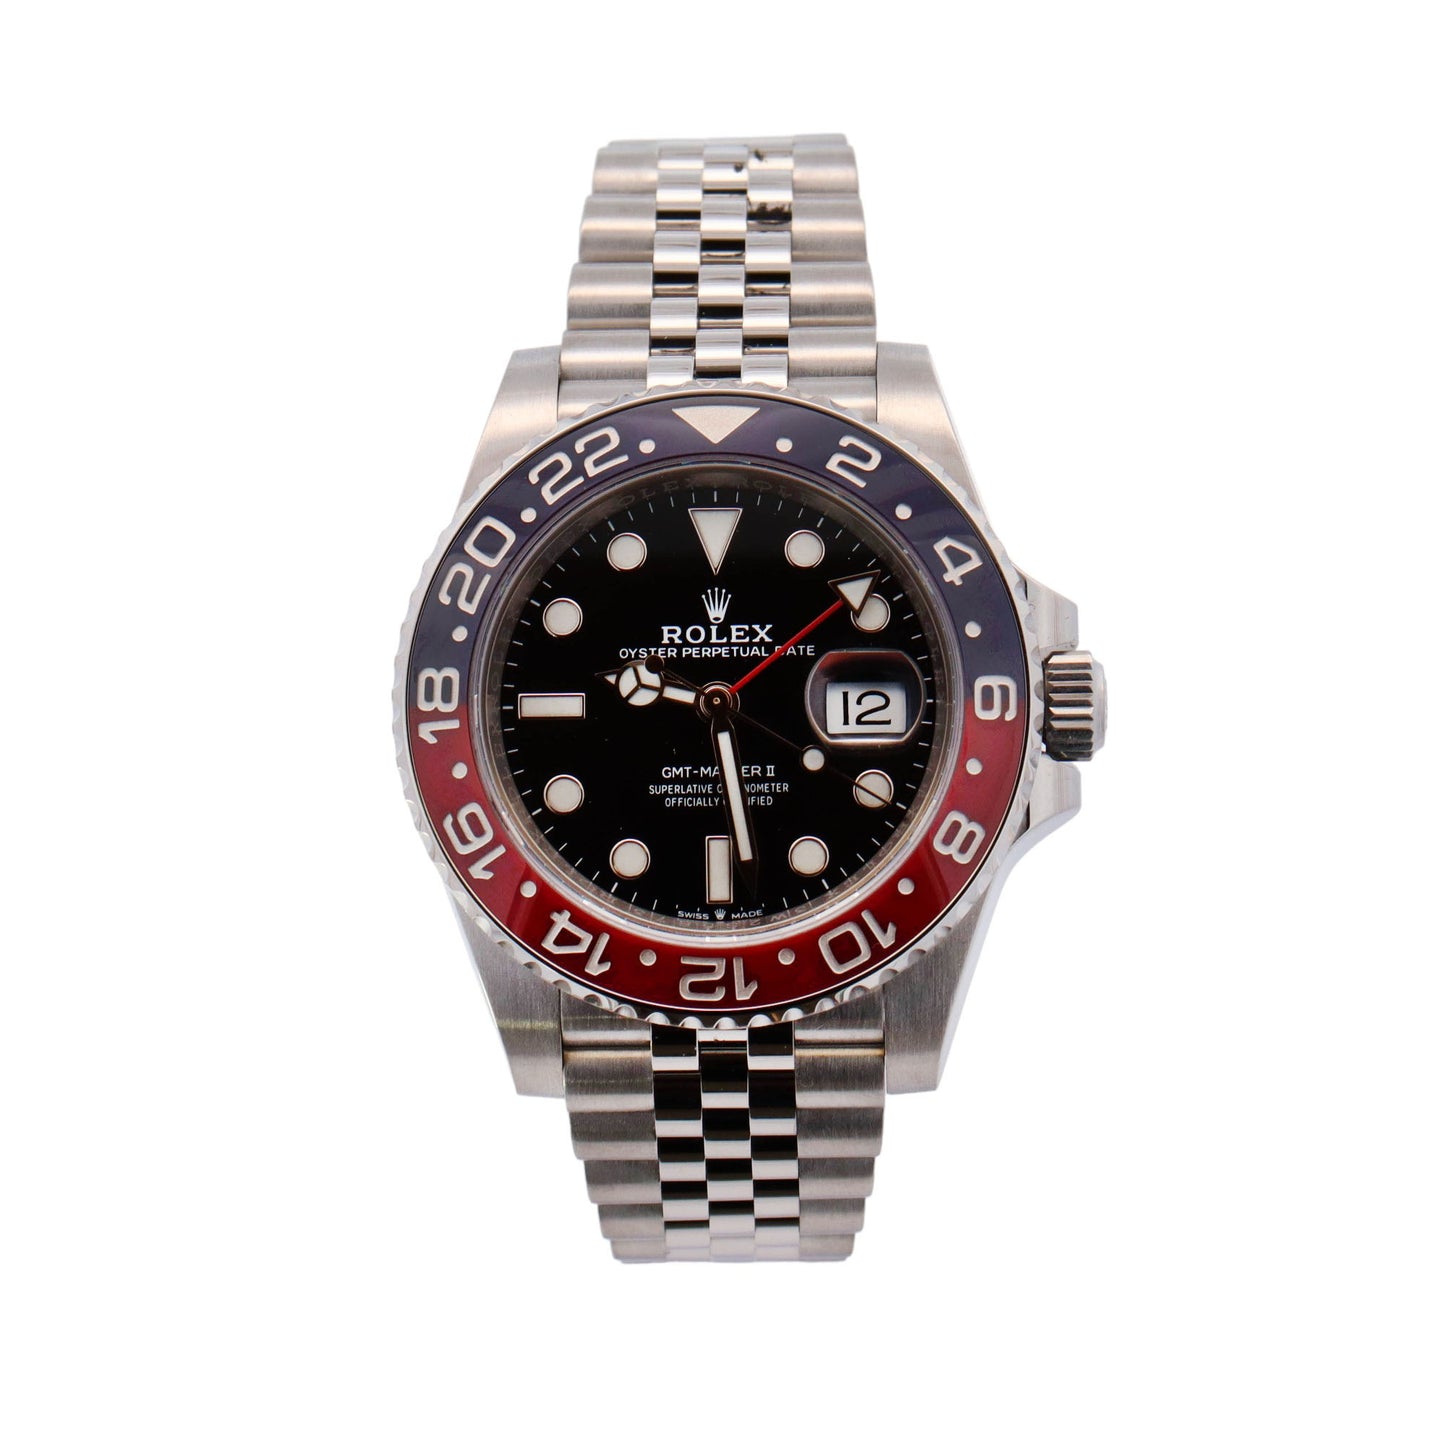 Rolex GMT Master "Pepsi" Stainless Steel 40mm Black Dot Dial Watch Reference#: 126710BLRO - Happy Jewelers Fine Jewelry Lifetime Warranty